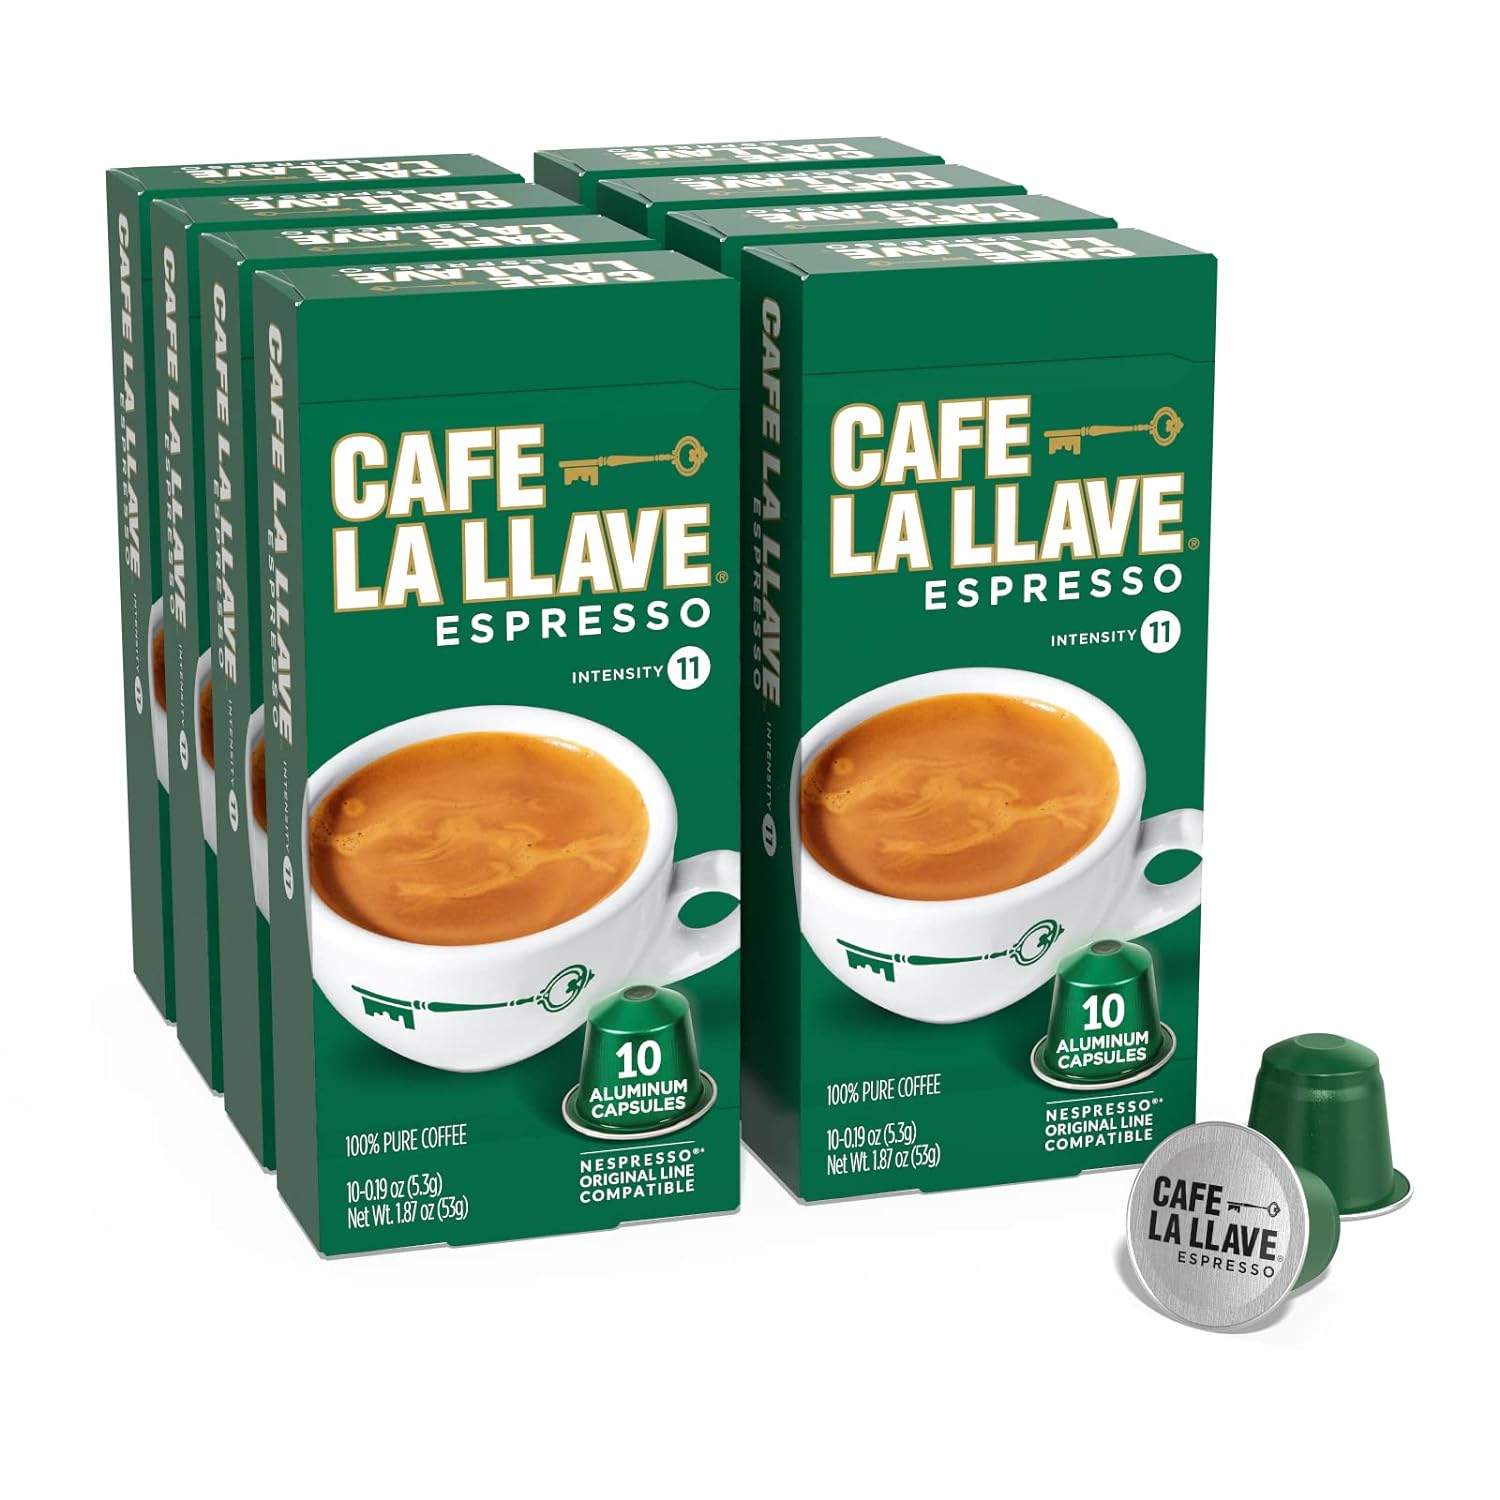 I've tried over a dozen Nespresso alternative capsules and this is the least expensive alternative and just as good as the Nespresso capsules. They foam well and have a rich, satisfying flavor. I drink two of these a day so it costs me around $20/month for espresso, way better than going to Starbucks.Set them up through subscribe and save for a 15% discount.